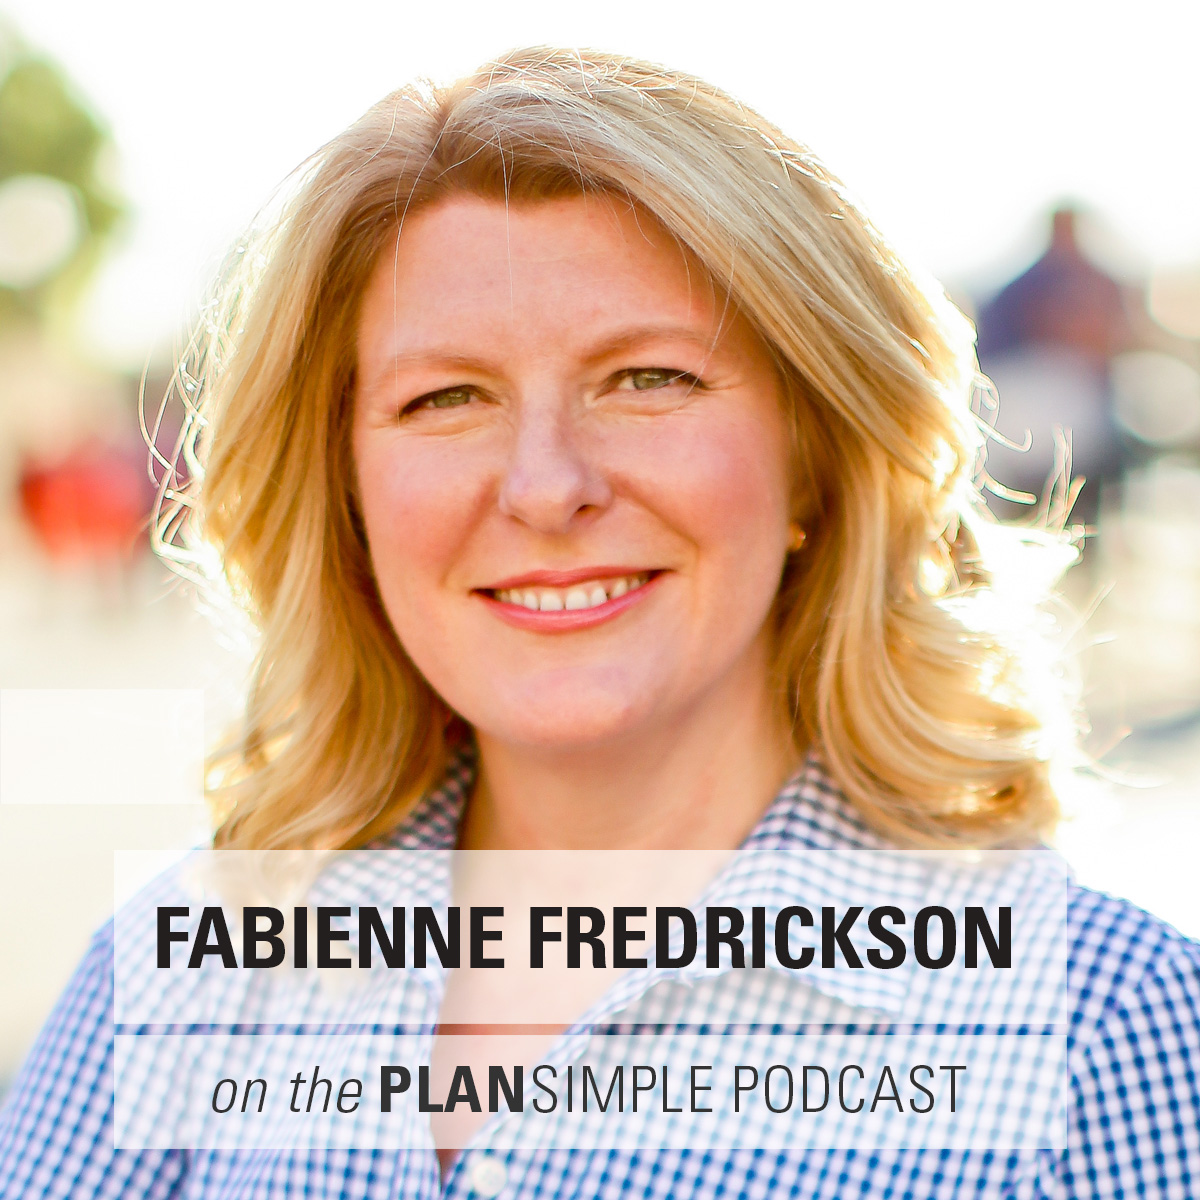 Get Your Life Back With Fabienne Fredrickson